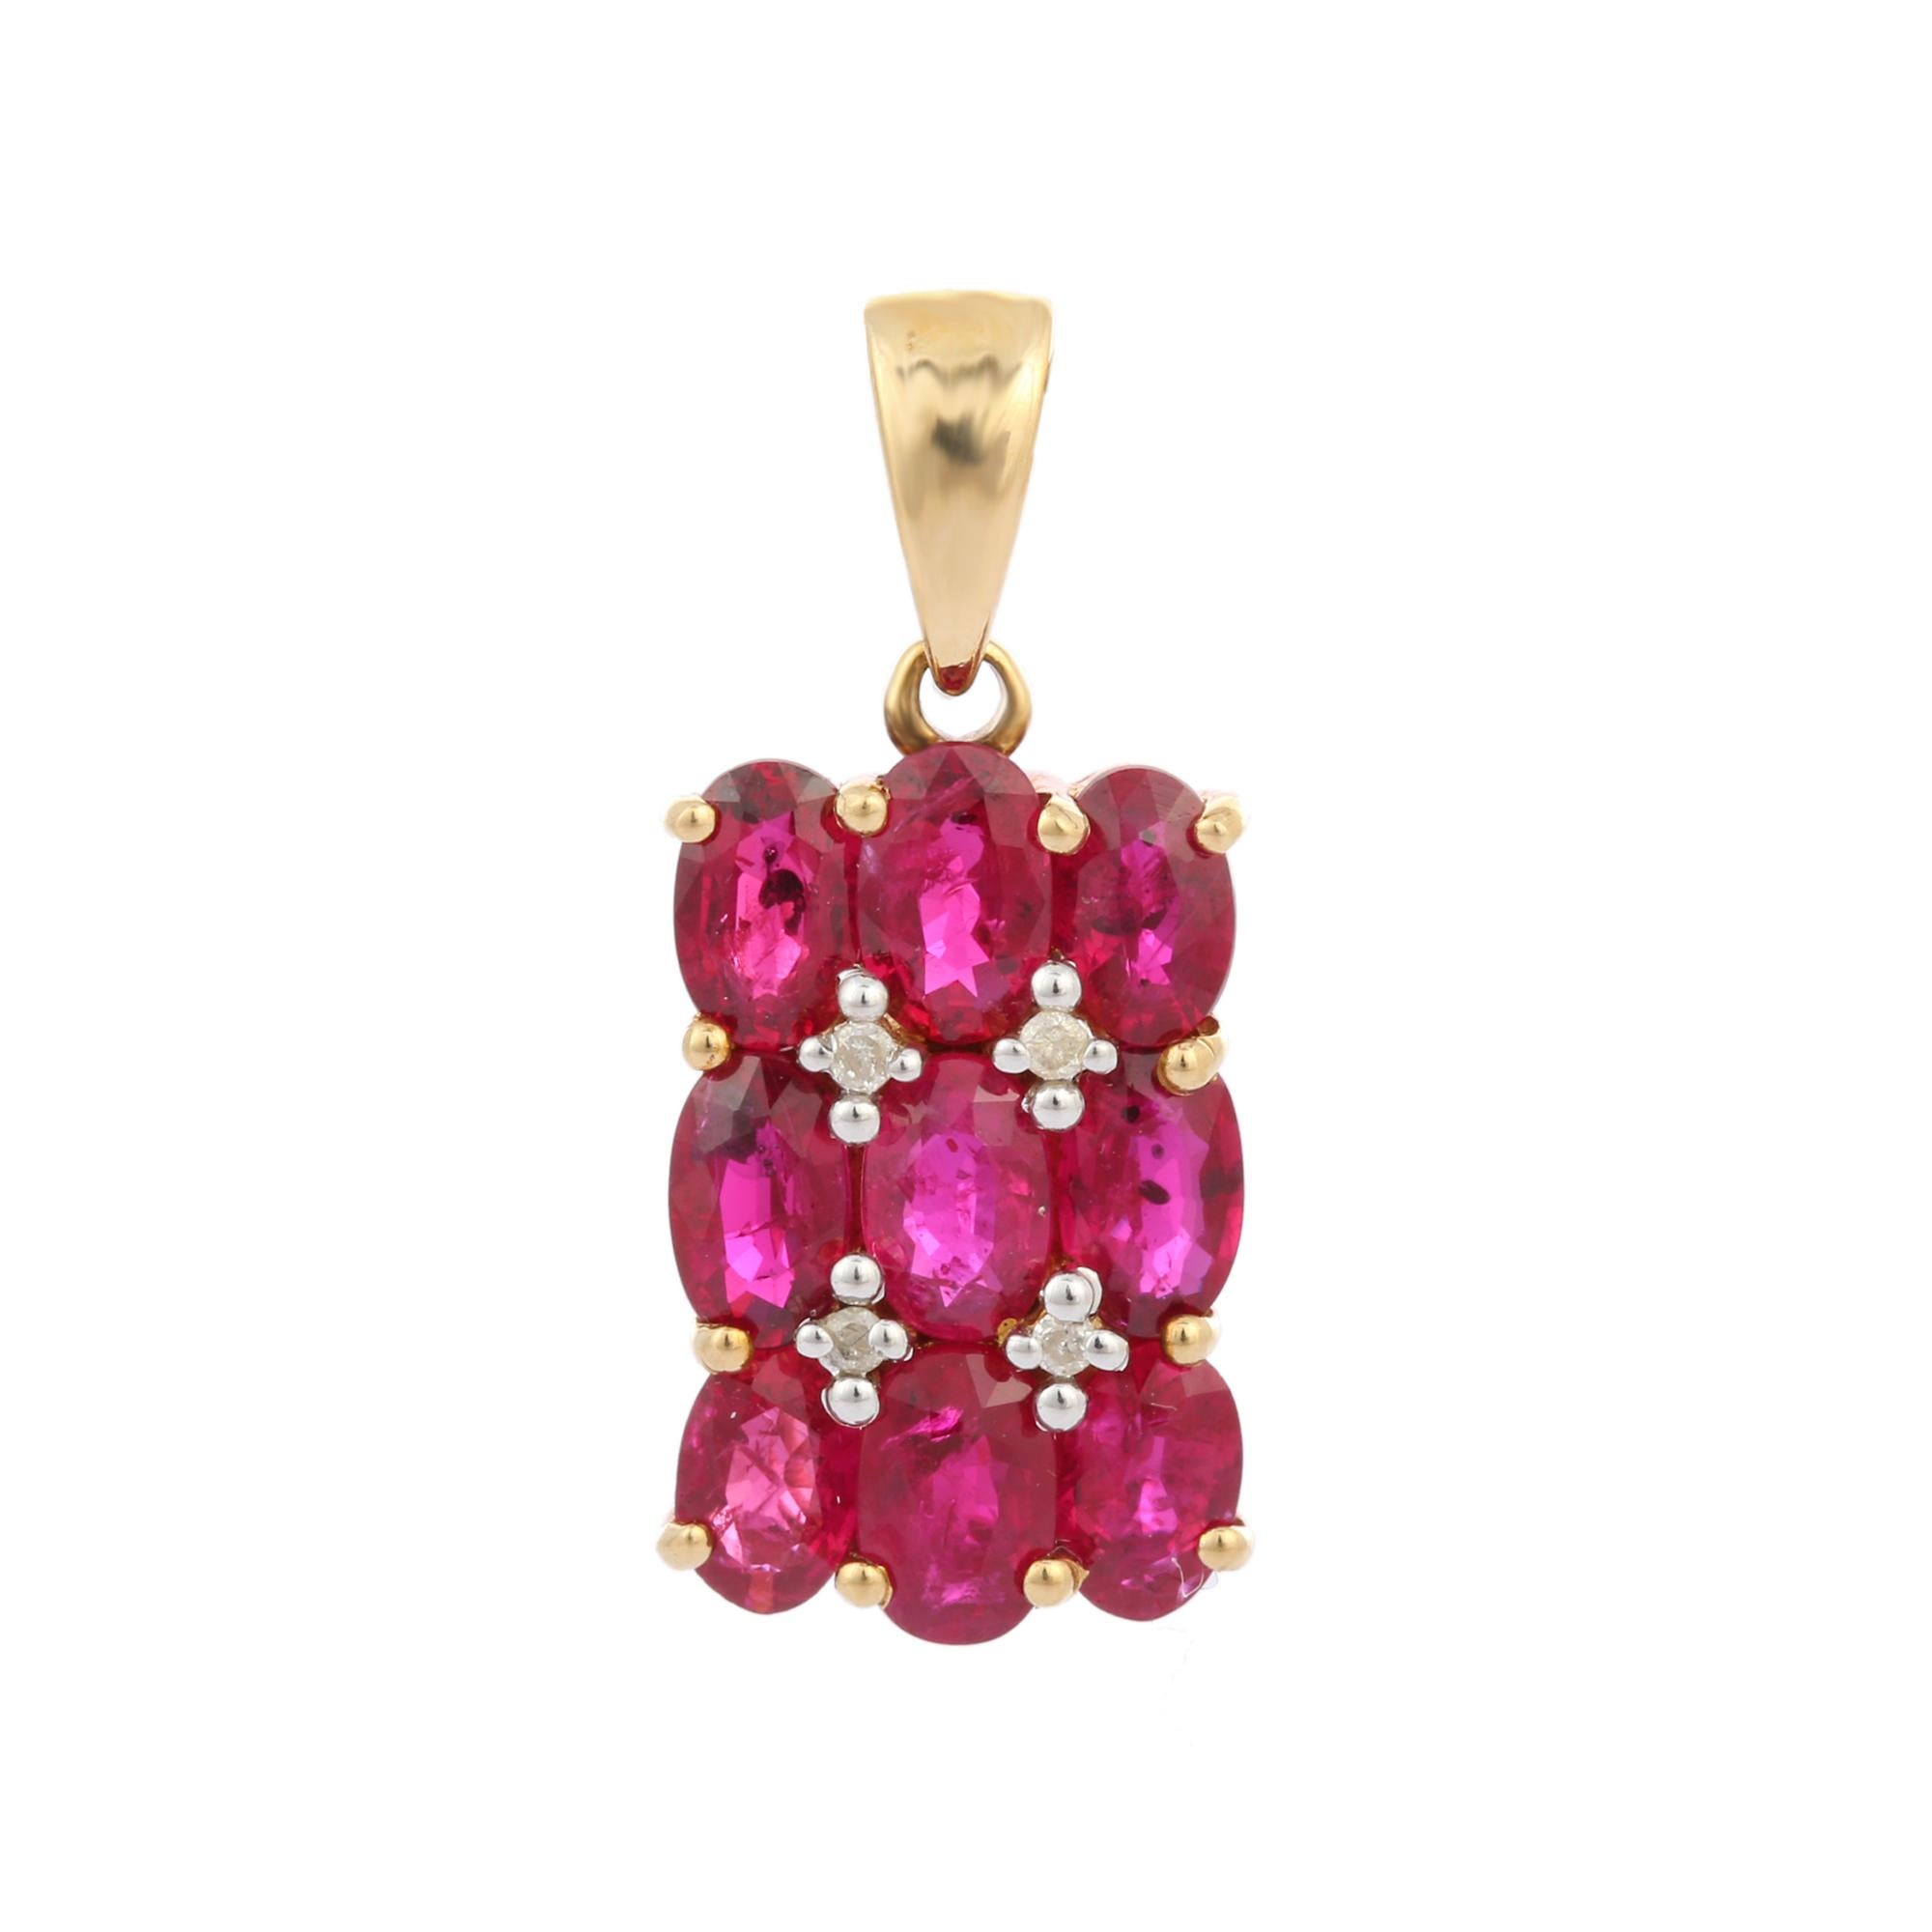 2.76 red ruby diamond cushion cluster pendant in 14K Gold. It has a oval cut rubies that completes your look with a decent touch. Pendants are used to wear or gifted to represent love and promises. It's an attractive jewelry piece that goes with